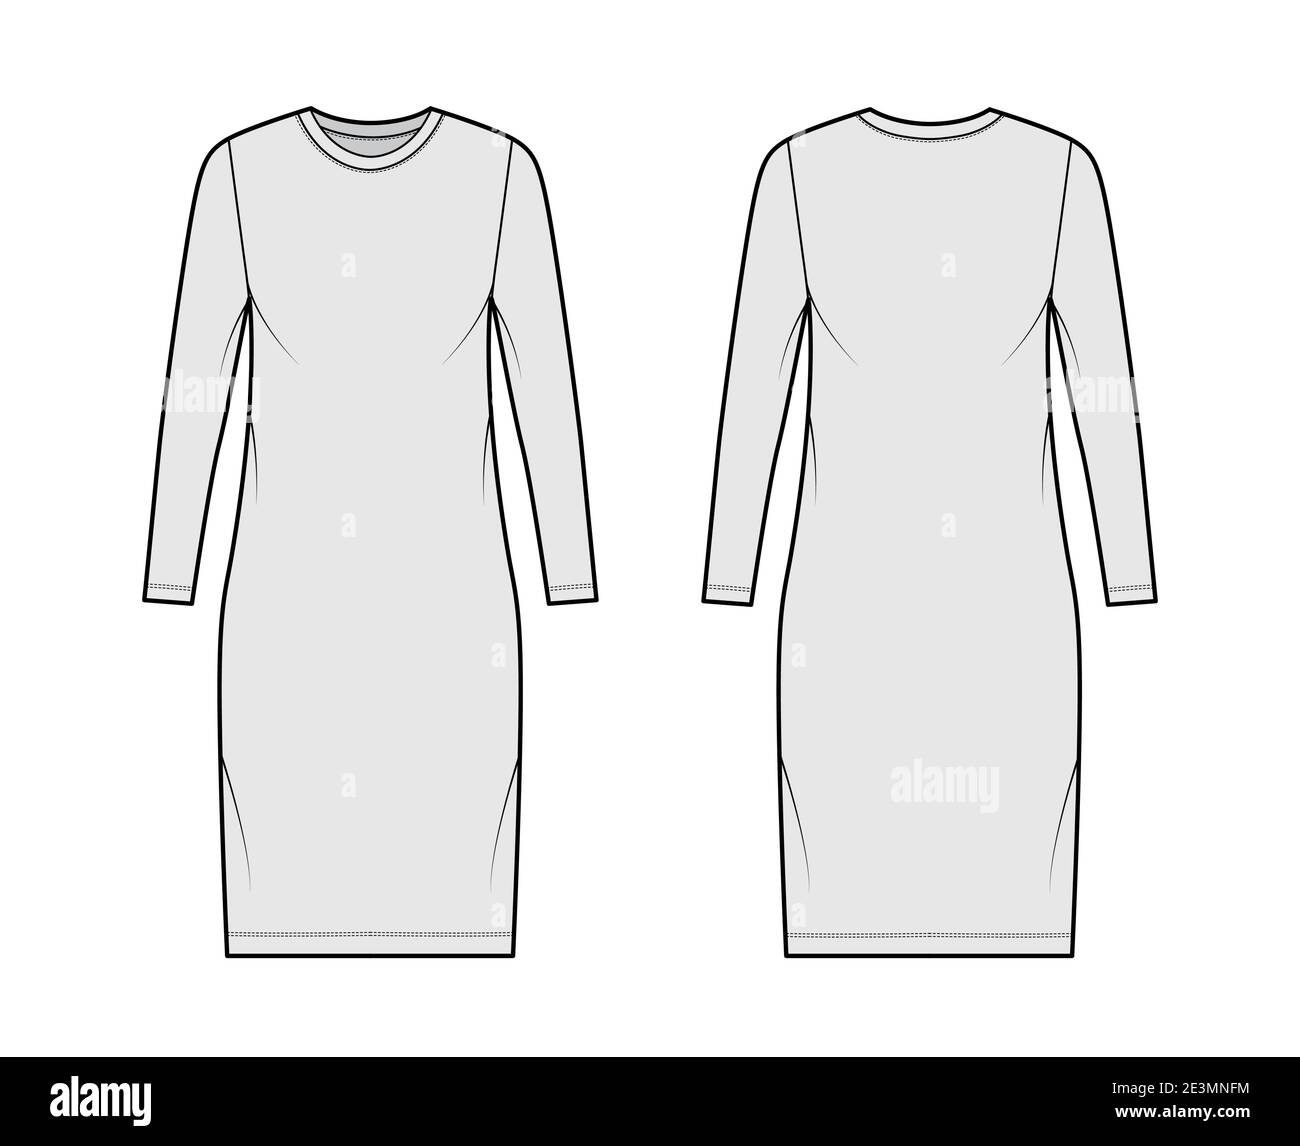 T-shirt dress technical fashion illustration with crew neck, long sleeves, knee length, oversized, Pencil fullness. Flat apparel template front, back, grey color. Women, men, unisex CAD mockup Stock Vector